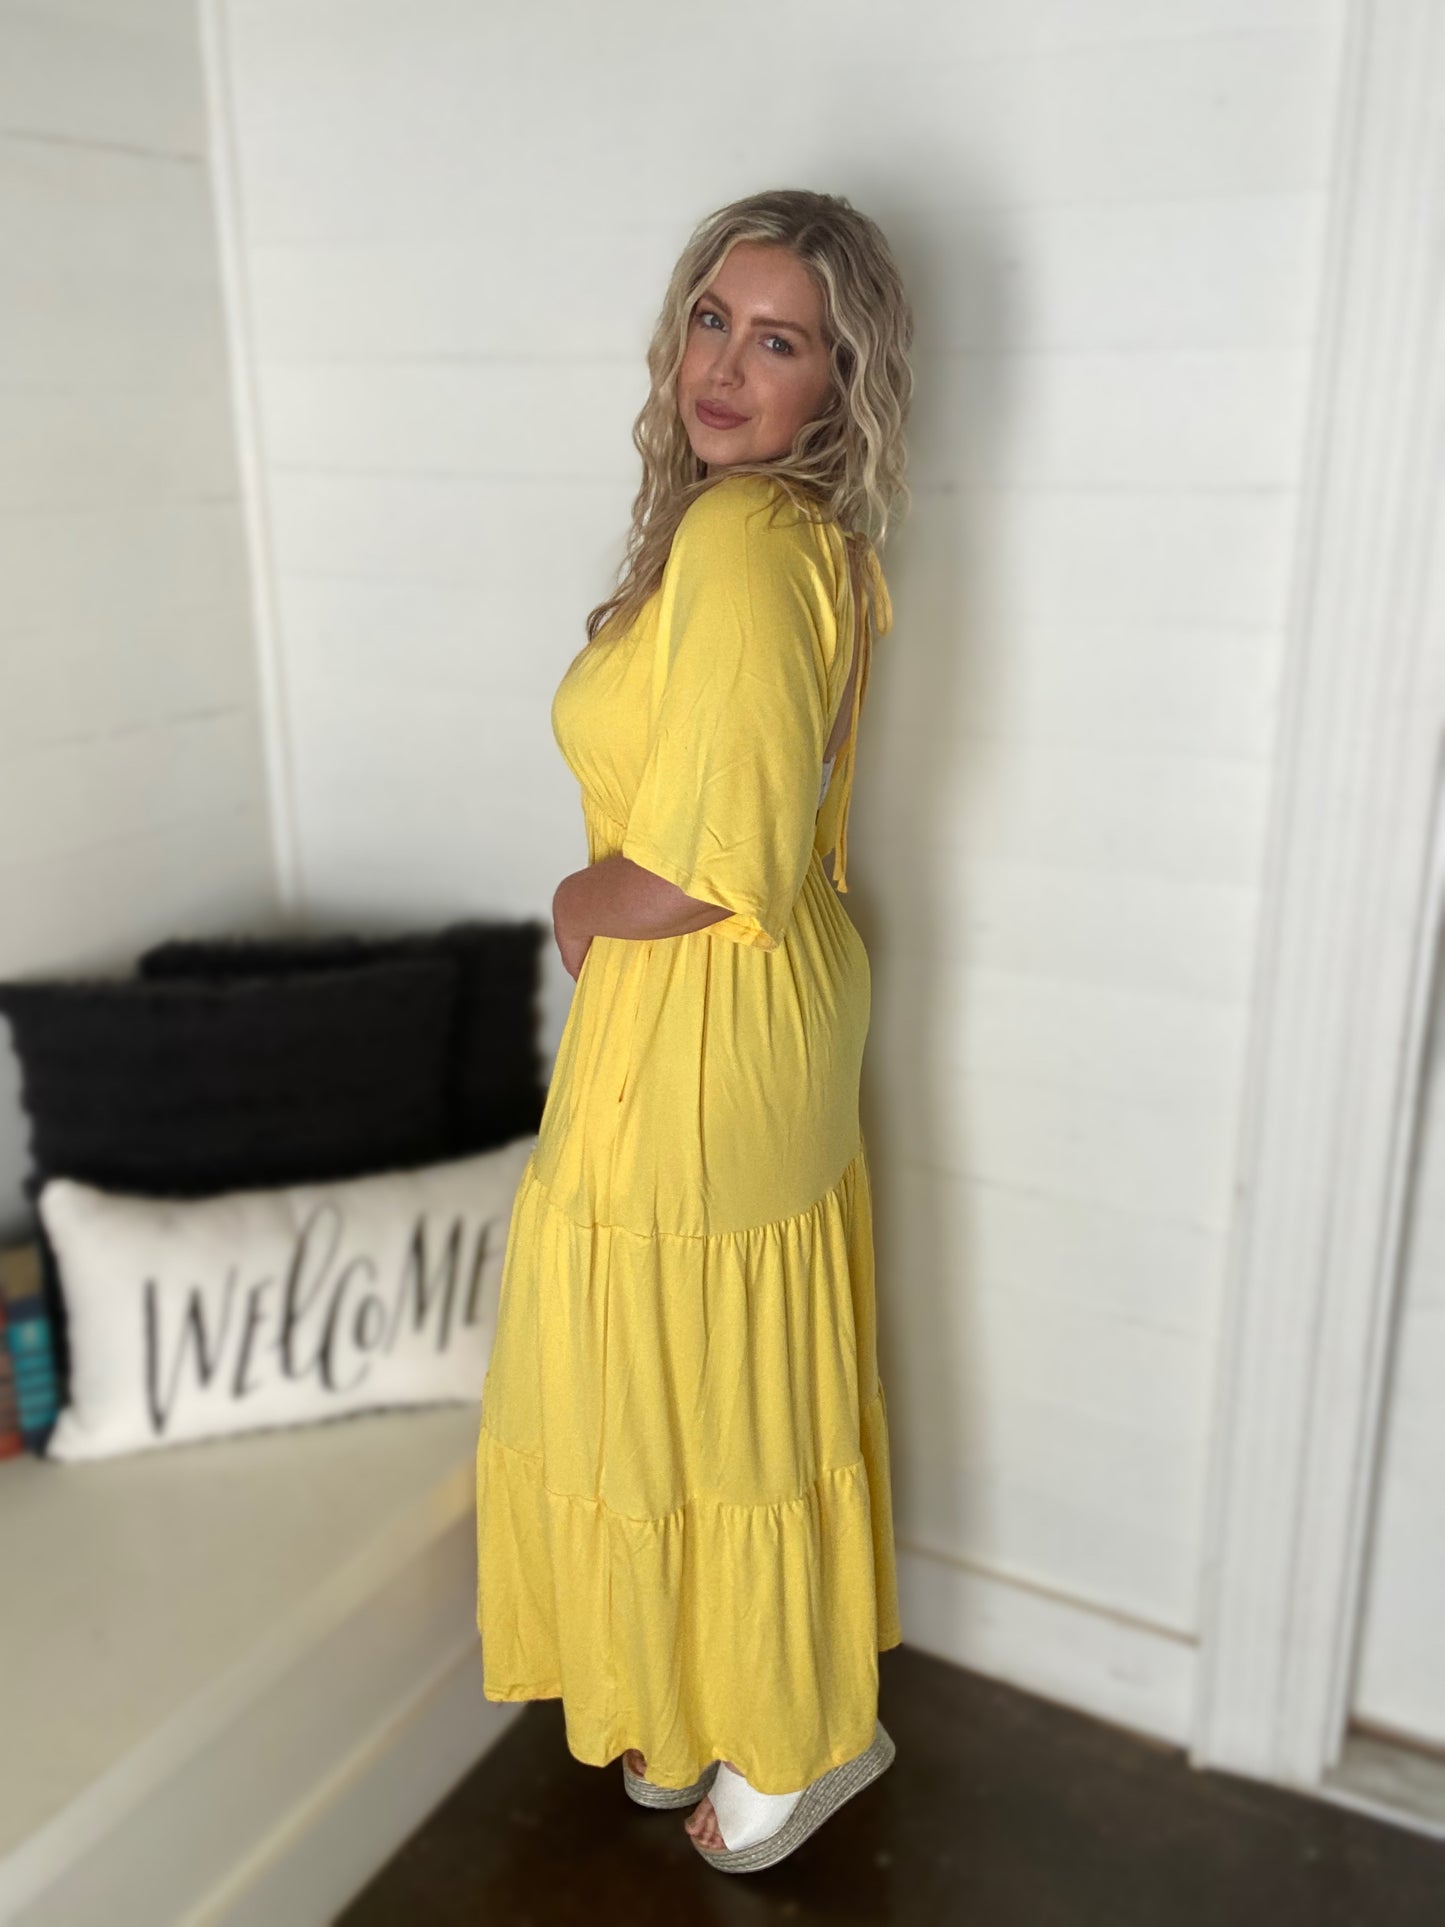 Yellow Flare Sleeve Ruching Tier Maxi Dress with Open Back S-3XL